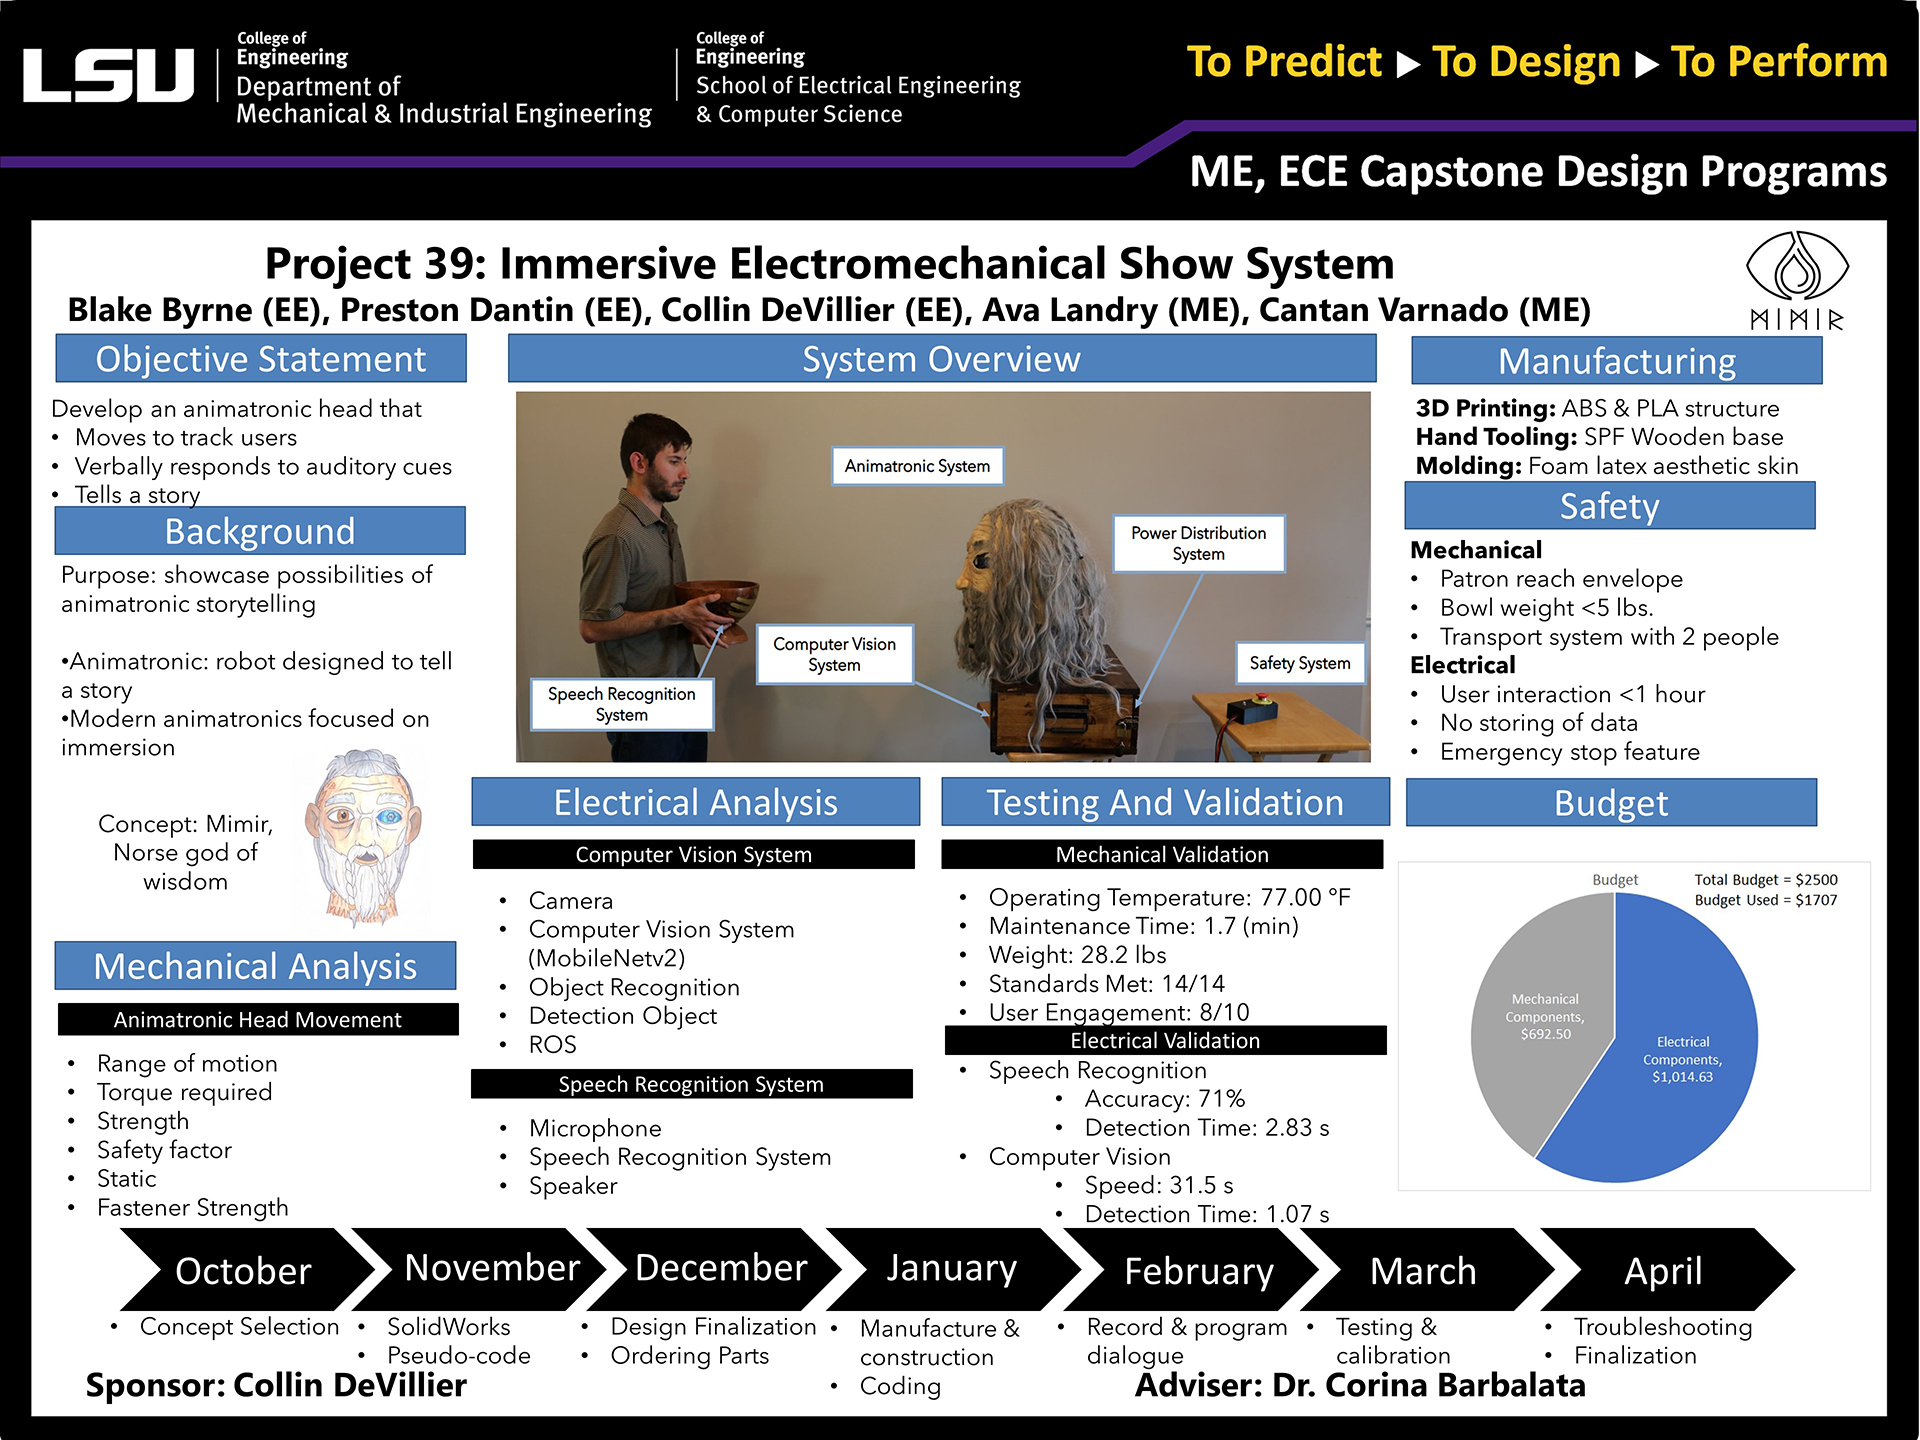 Project 39: Immersive Electromechanical Show System (2022)